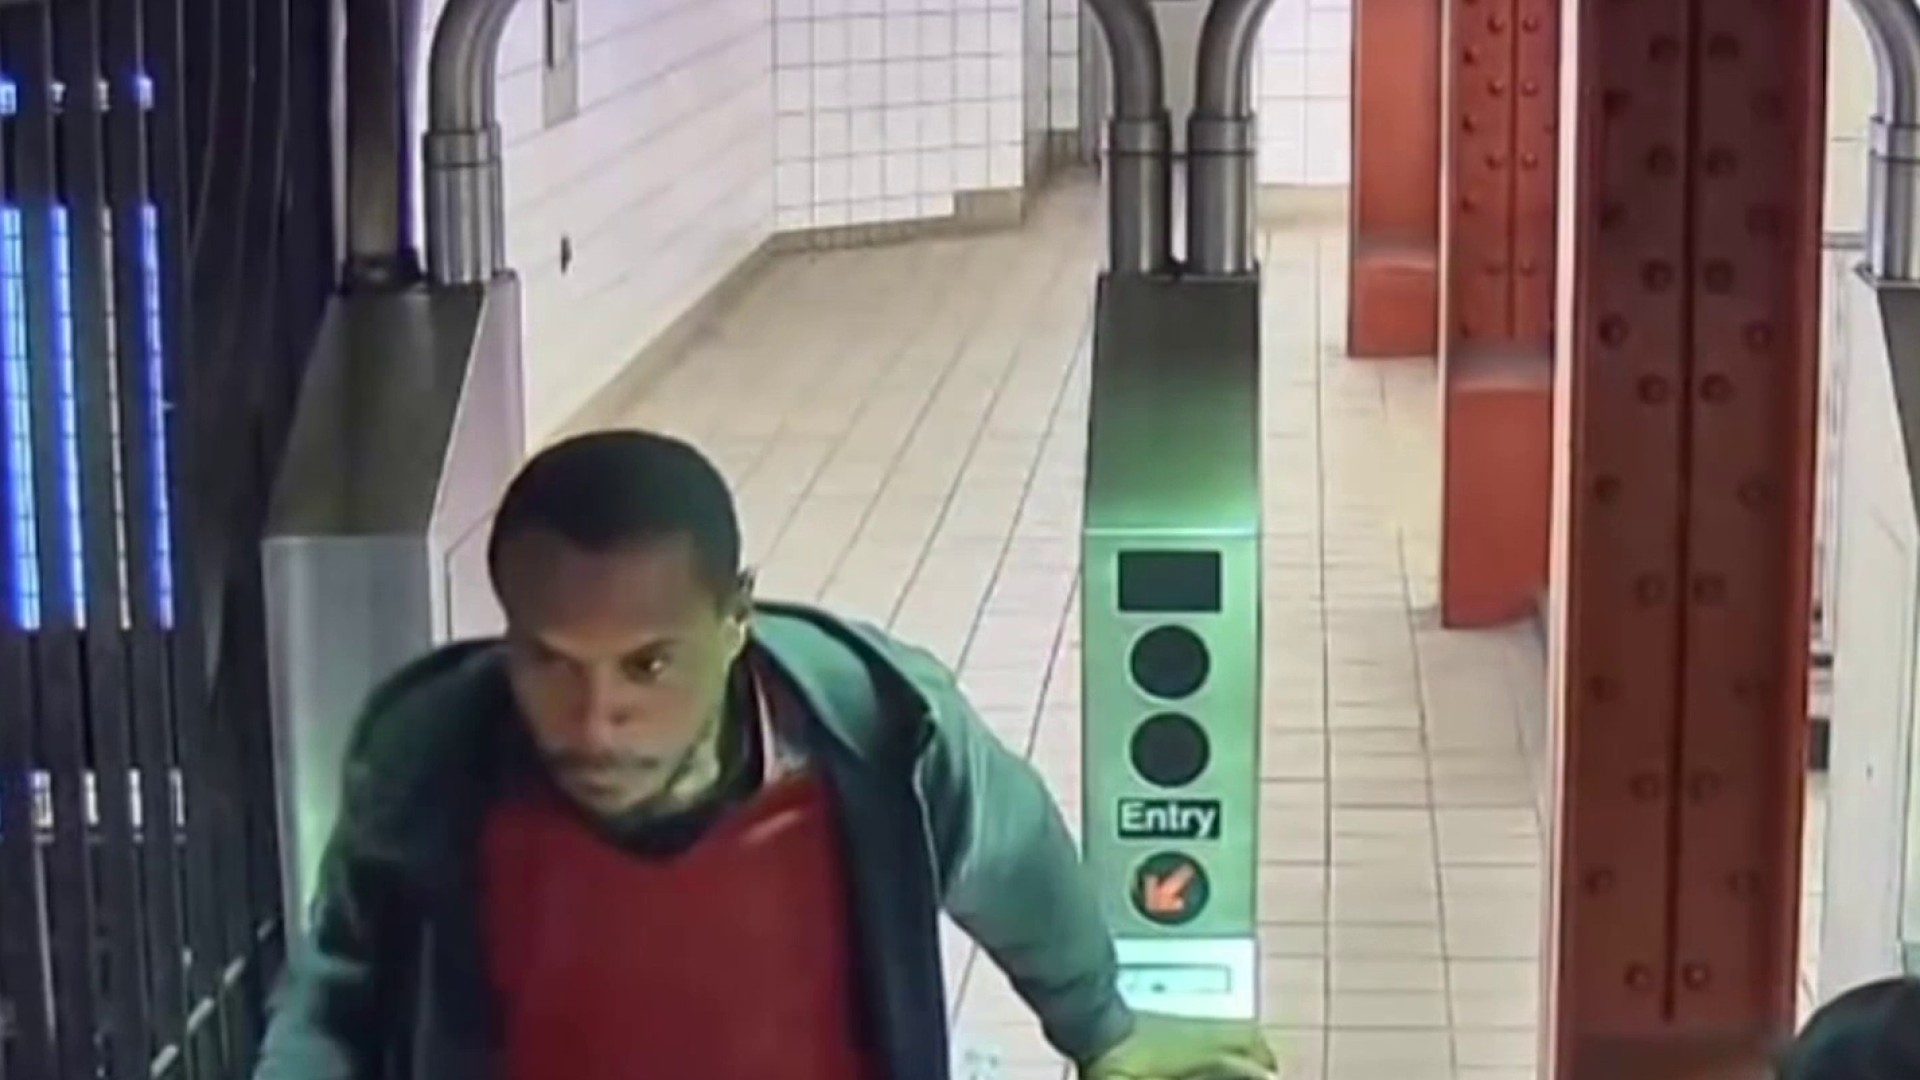 Suspect in midtown Manhattan subway station push arrested, tied to 2nd  attack: Sources